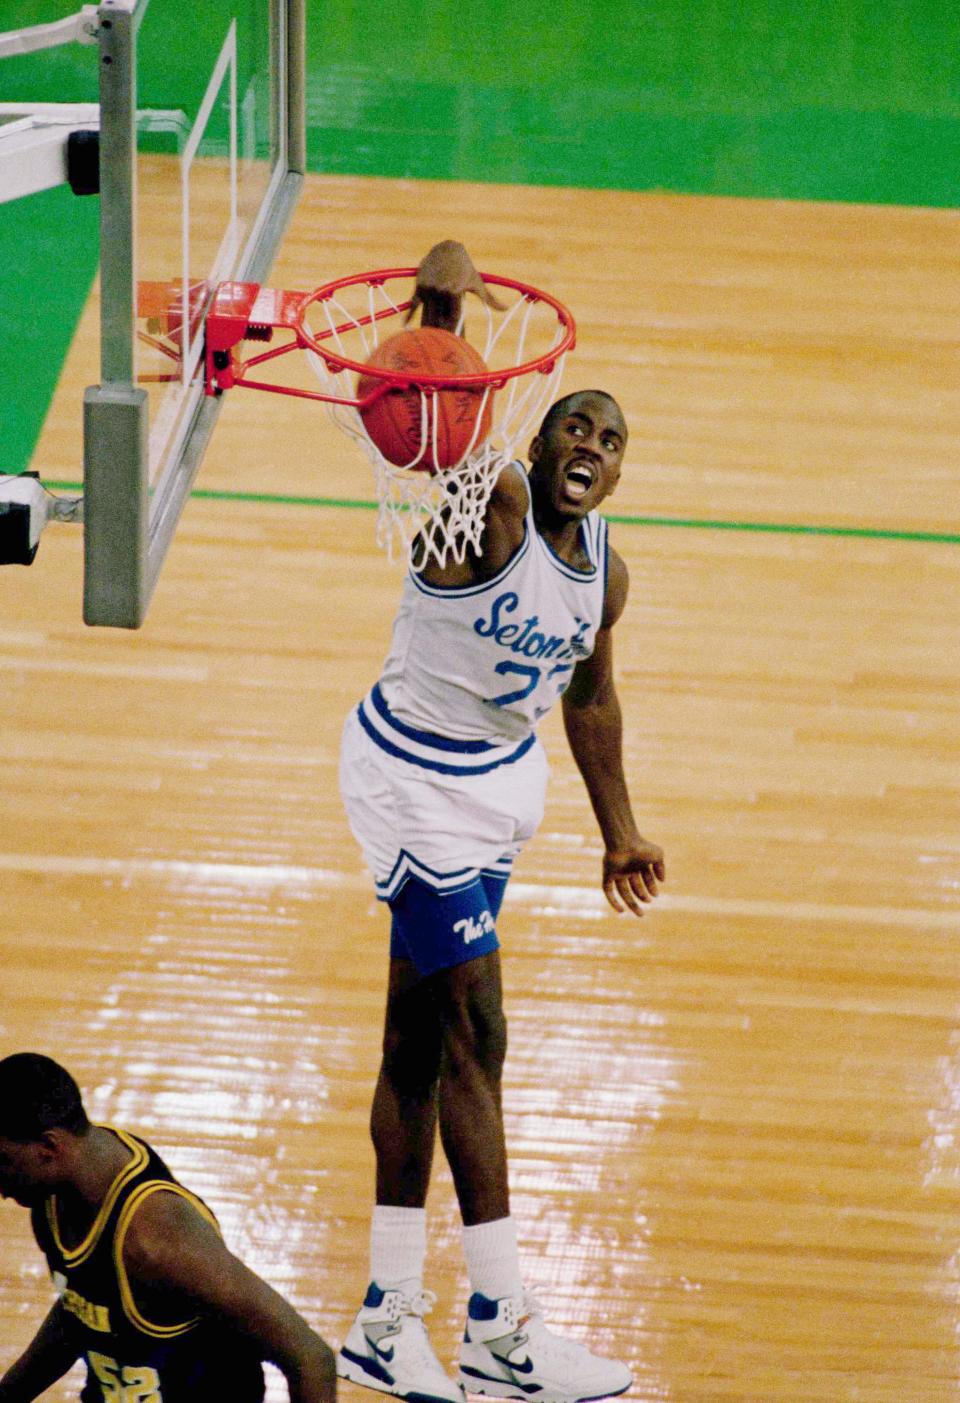 Seton Hall's John Morton slamming home two of his 35 points in a losing effort  to Michigan in the 1989 NCAA championship game in Seattle's Kingdome,